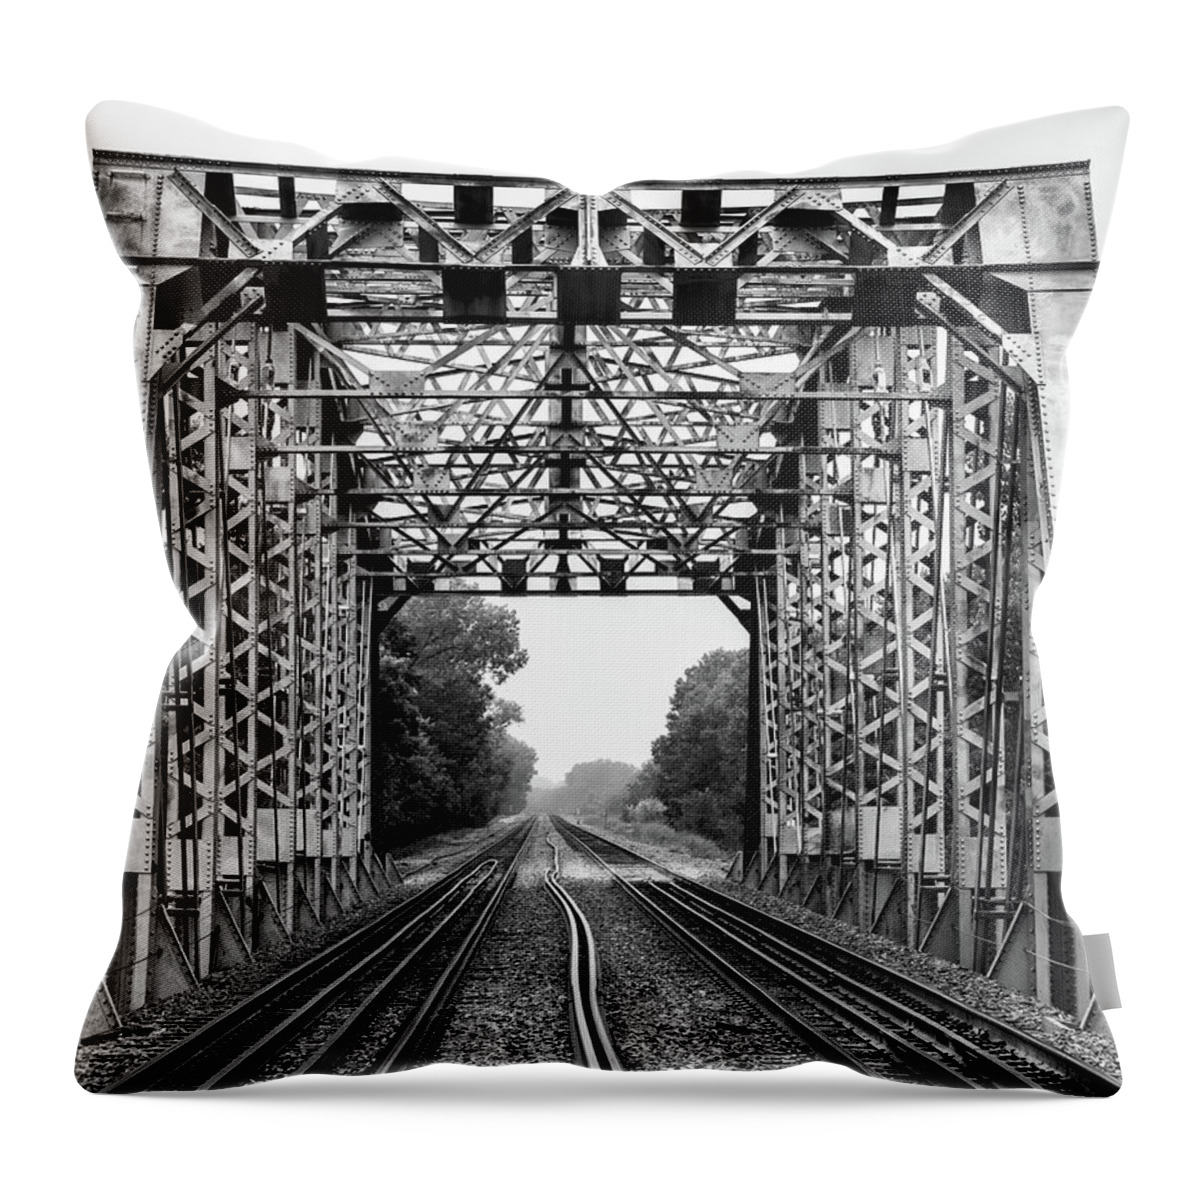 1905 Throw Pillow featuring the photograph Railroad Bridge 1905 by Jeff Phillippi